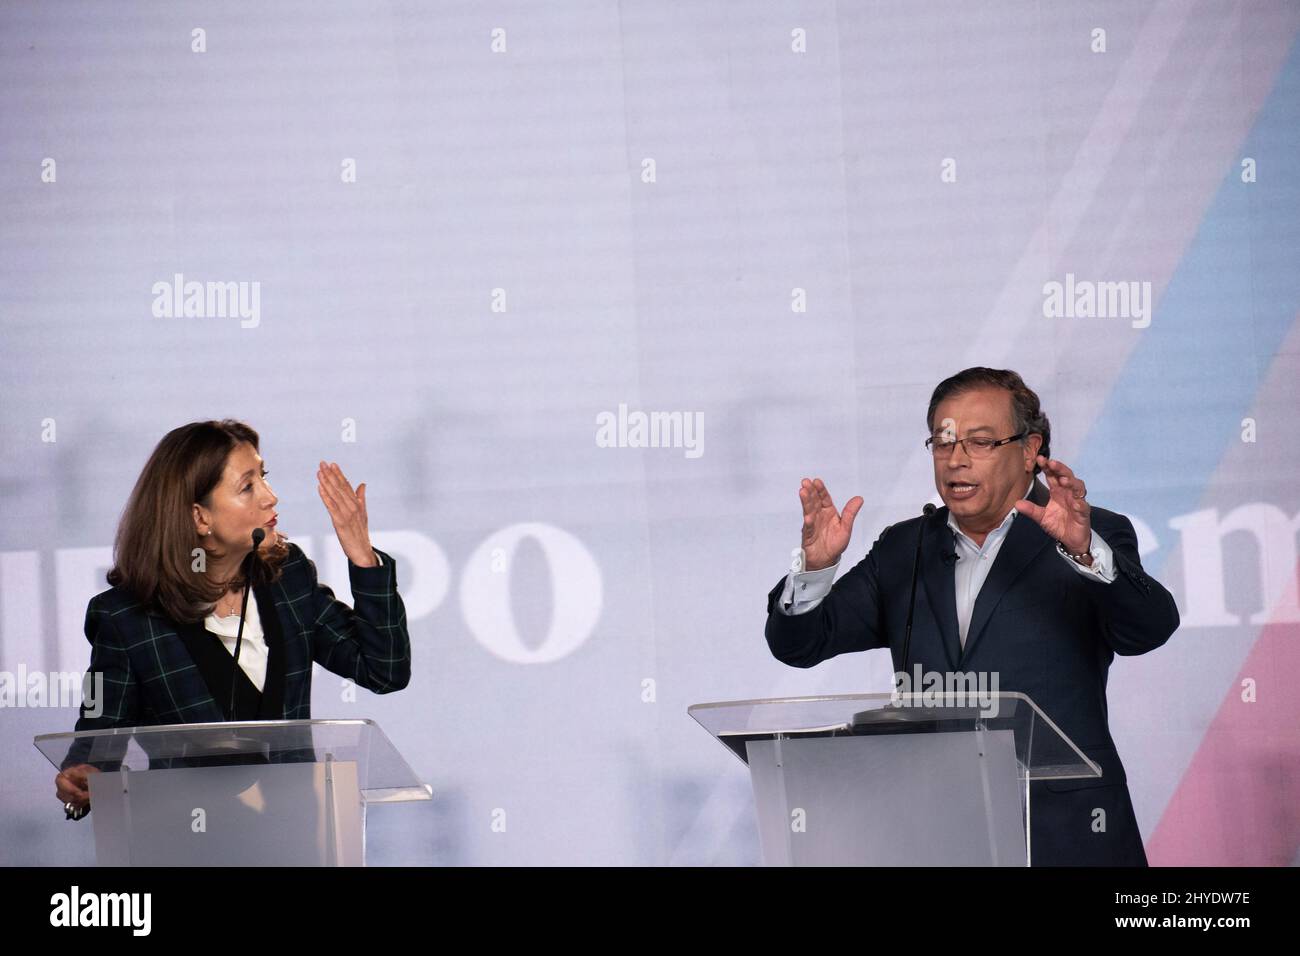 Bogota, Colombia. 14th Mar, 2022. Presidential candidate franch-colombian Ingrid Betancourt for political party 'Partido Verde Oxigeno' argues with leftist candidate for 'Pacto Historico' Gustavo Petro during the first debate after the preliminary elections in Bogota, Colombia, on March 14, 2022. Petro, from the leftist coalition 'Pacto Historico' won the most votes during the preliminary consultation during the congressional elections. Photo by: Daniel Romero/Long Visual Press Credit: Long Visual Press/Alamy Live News Stock Photo